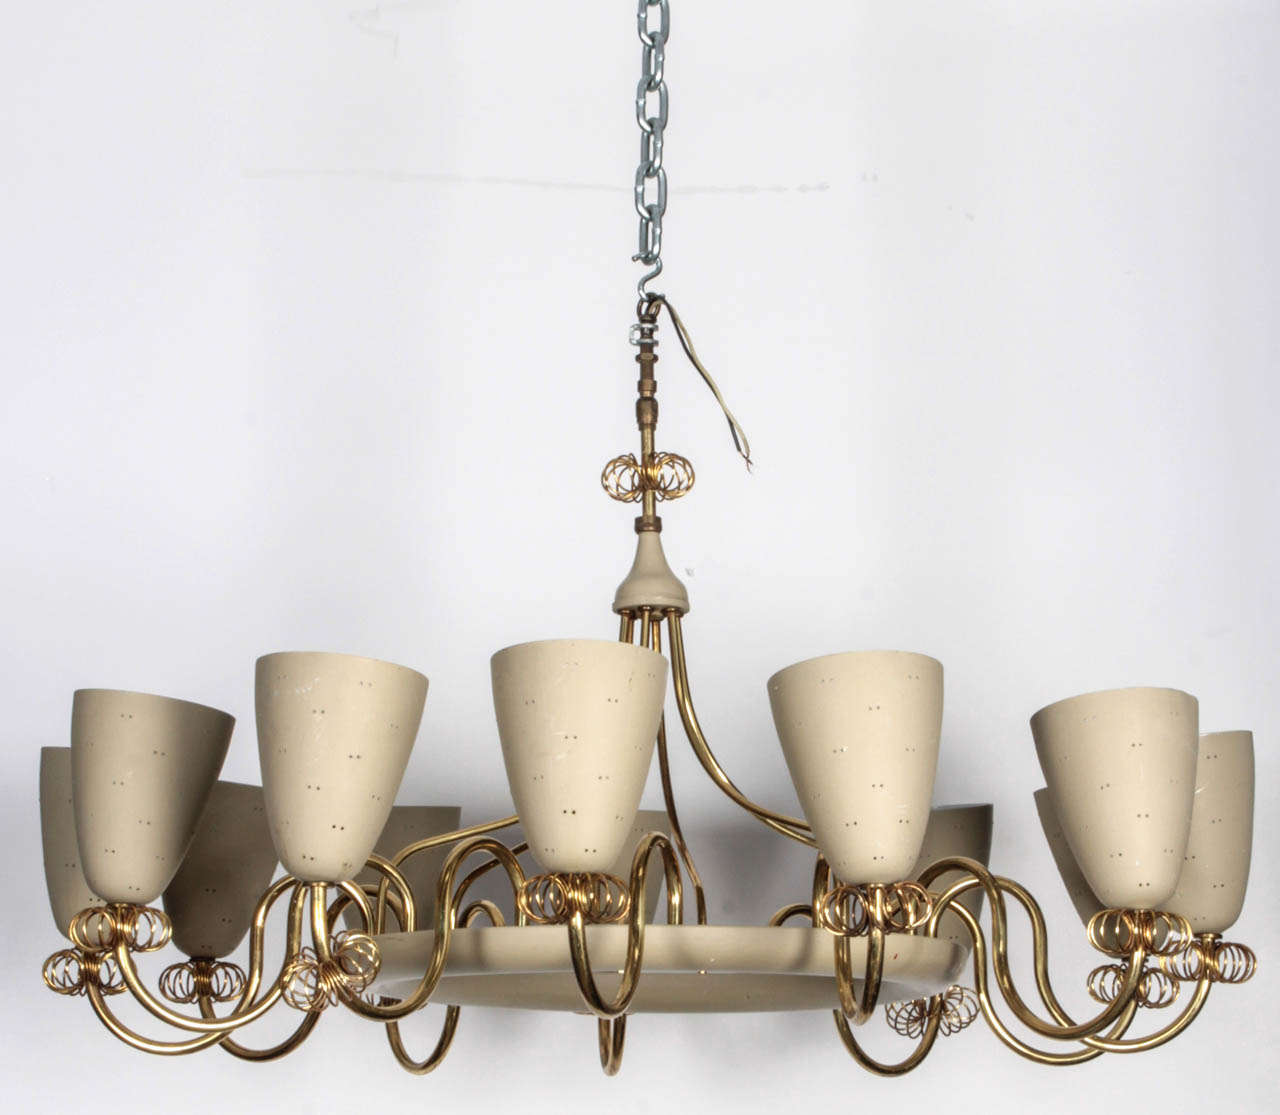 Twelve lights Chandelier by Lightolier 
Enameled metal body with brass detailing retained it's 
cream-beige colour in matte finish.
Matching chandelier available.